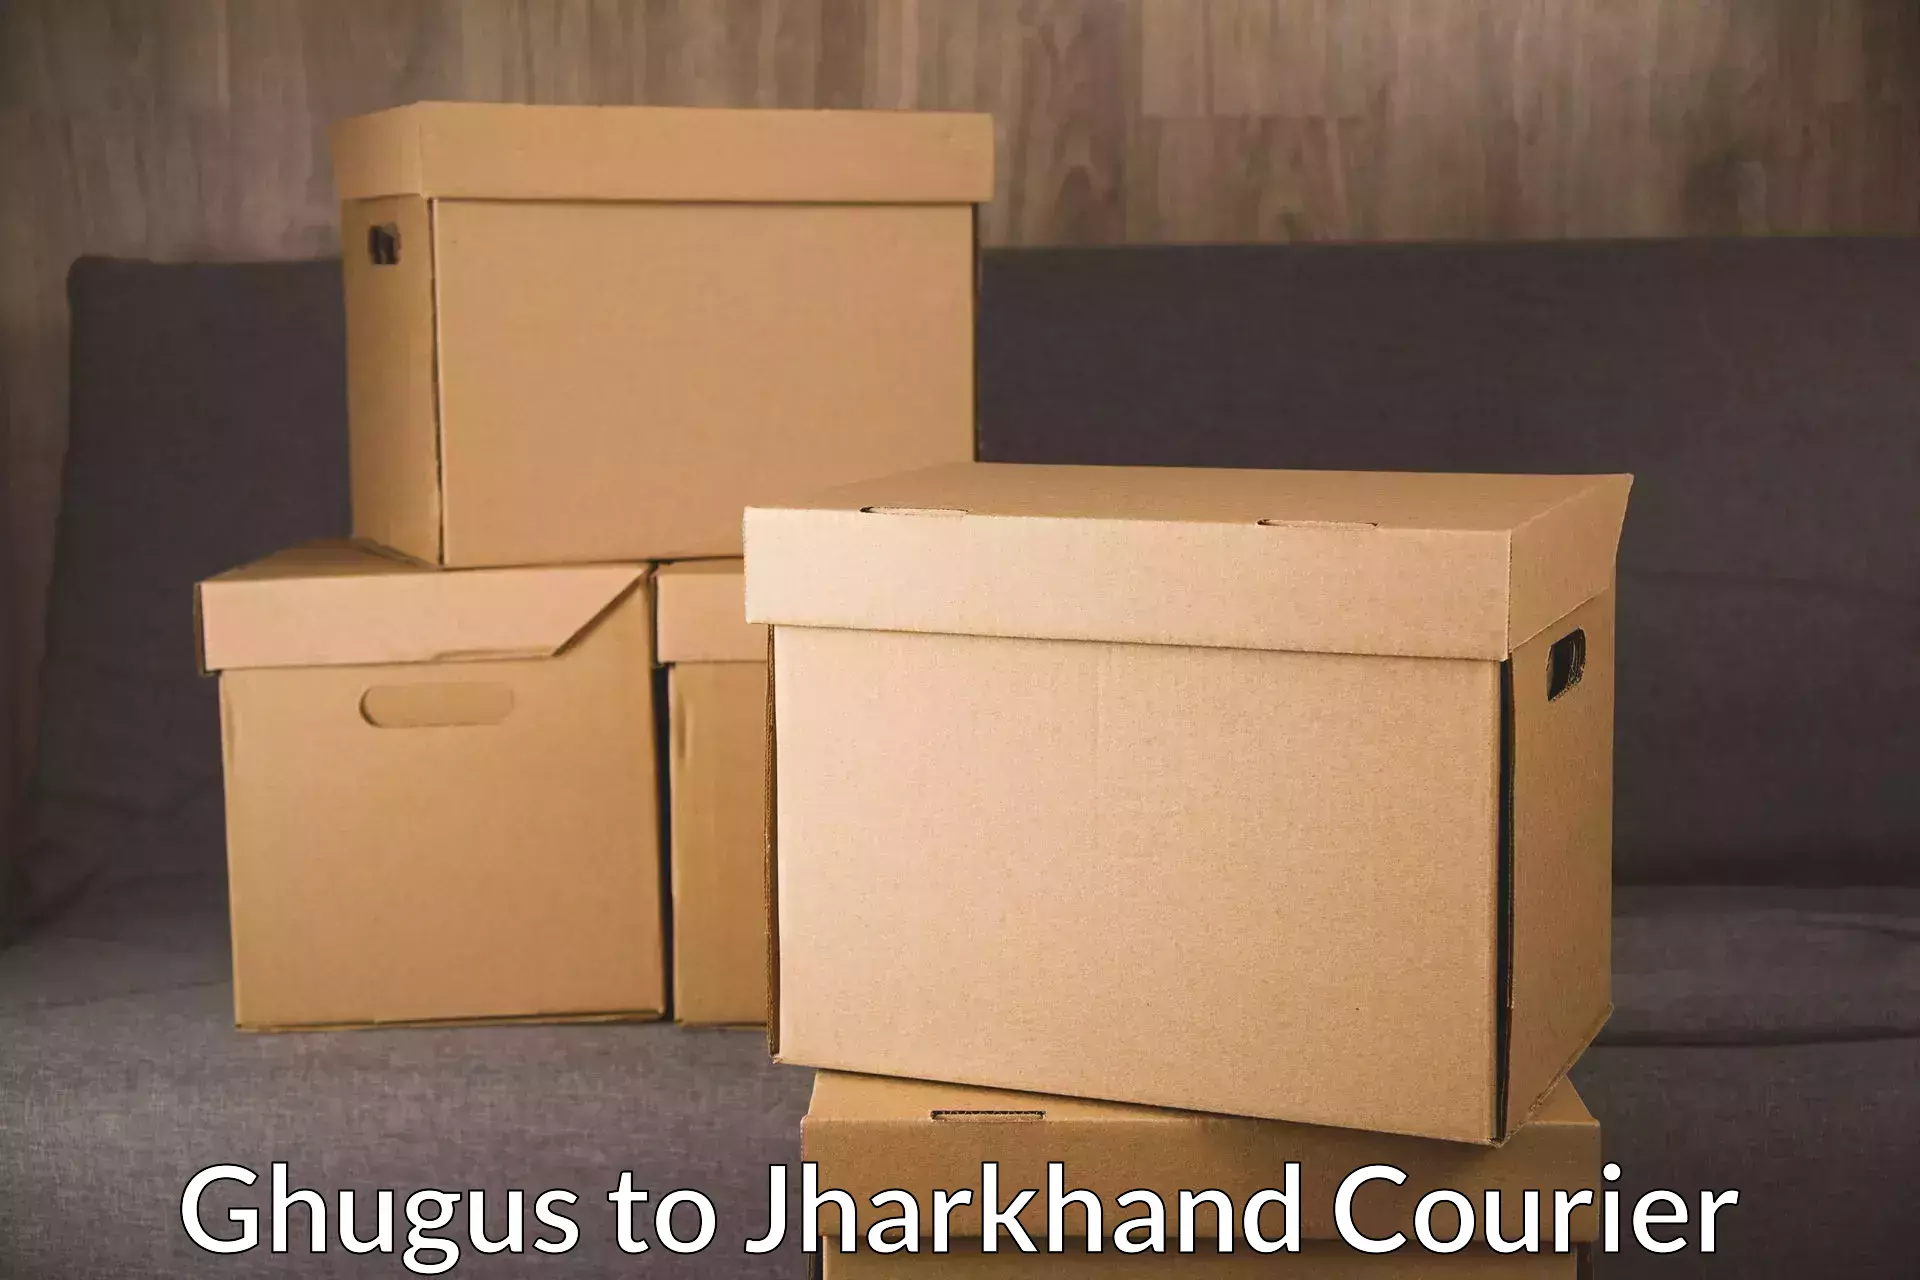 Courier service efficiency Ghugus to Jharkhand